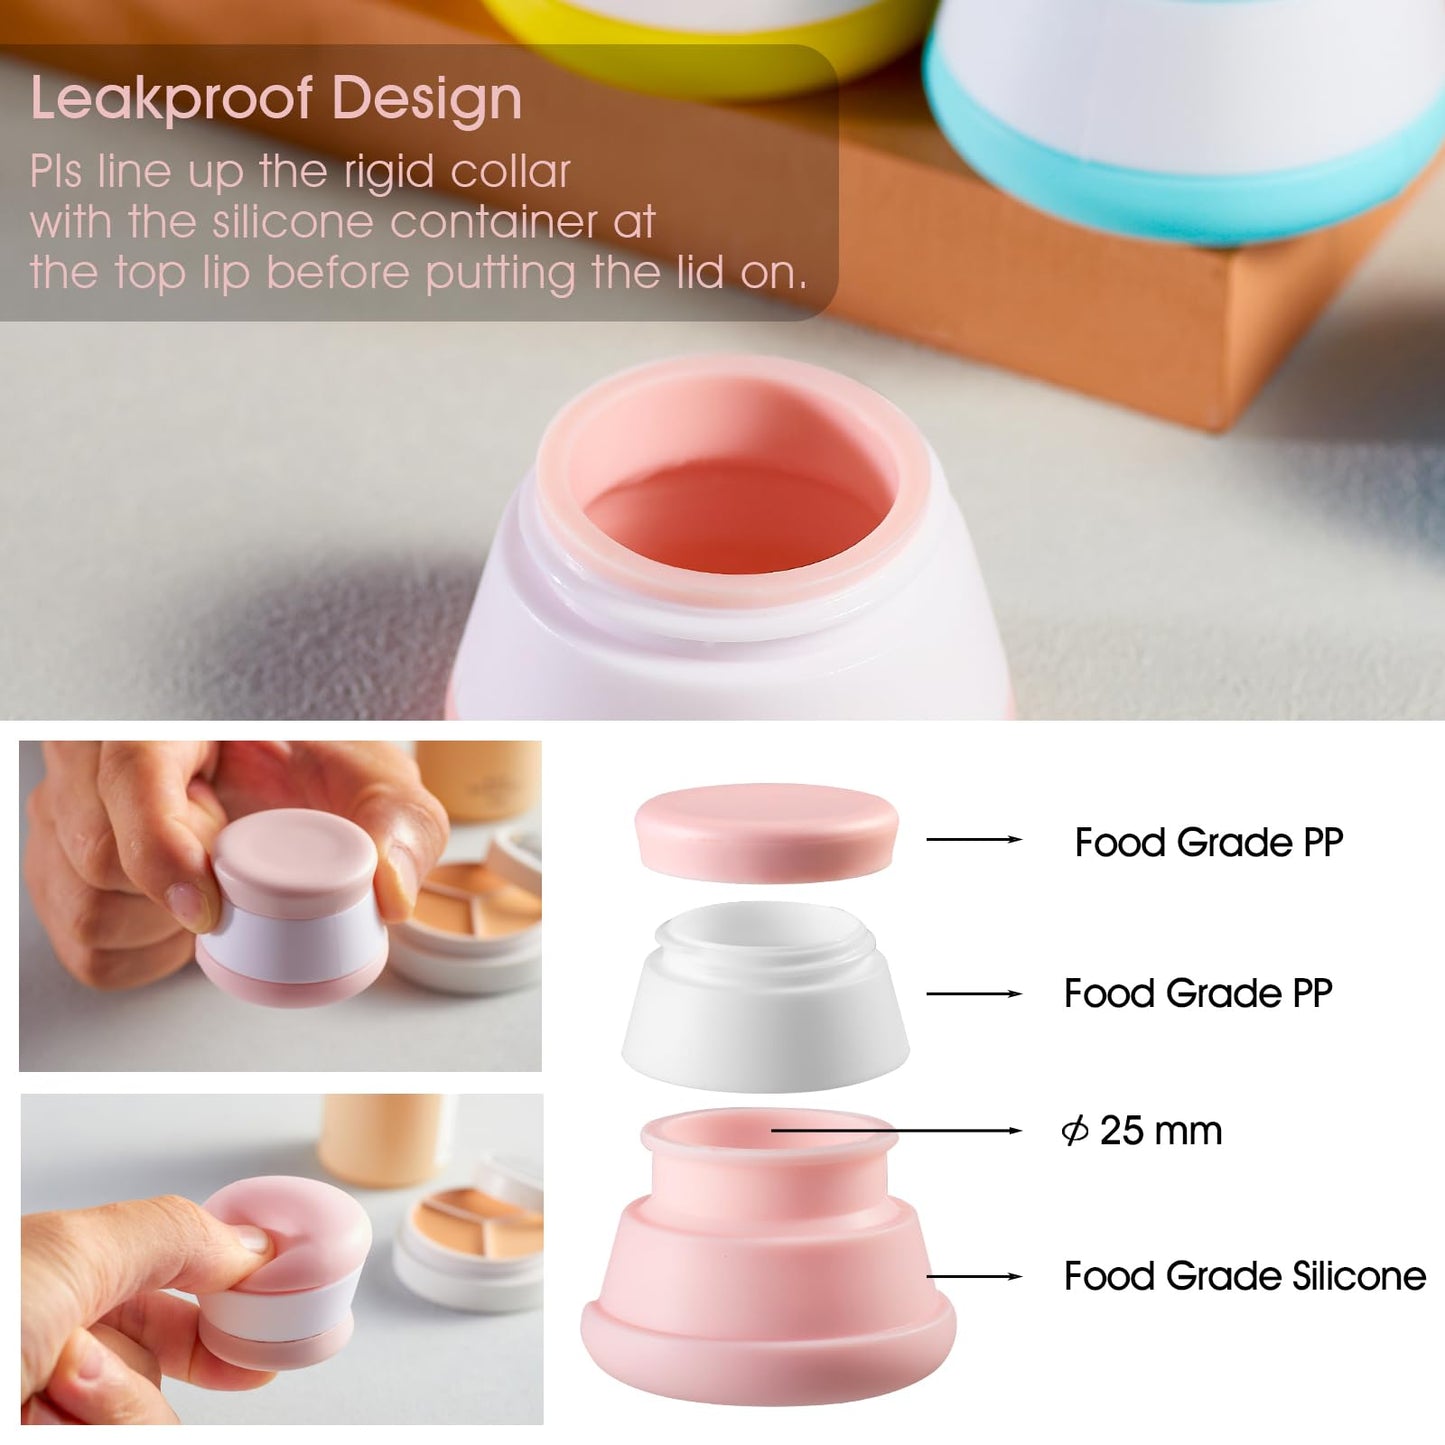 INSFIT Travel Containers for Toiletries, TSA Approved Silicone Cream Jars, Travel Size Containers with Lids, 5PCS BPA Free Leakproof Travel Accessories for Liquid Lotion with Labels Mini Spatulas